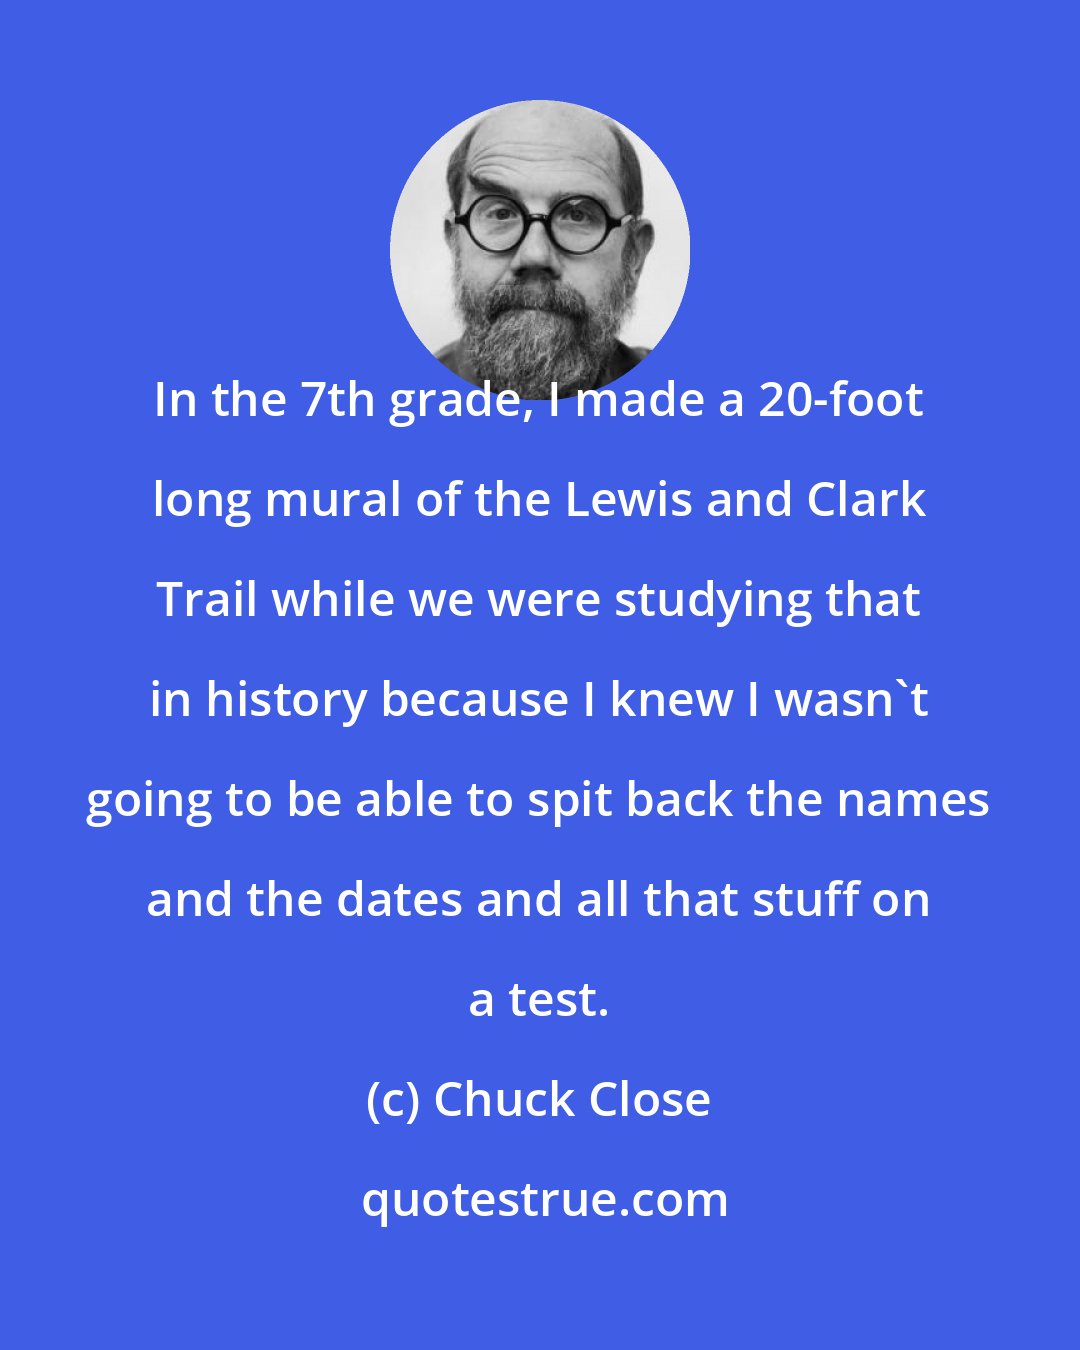 Chuck Close: In the 7th grade, I made a 20-foot long mural of the Lewis and Clark Trail while we were studying that in history because I knew I wasn't going to be able to spit back the names and the dates and all that stuff on a test.